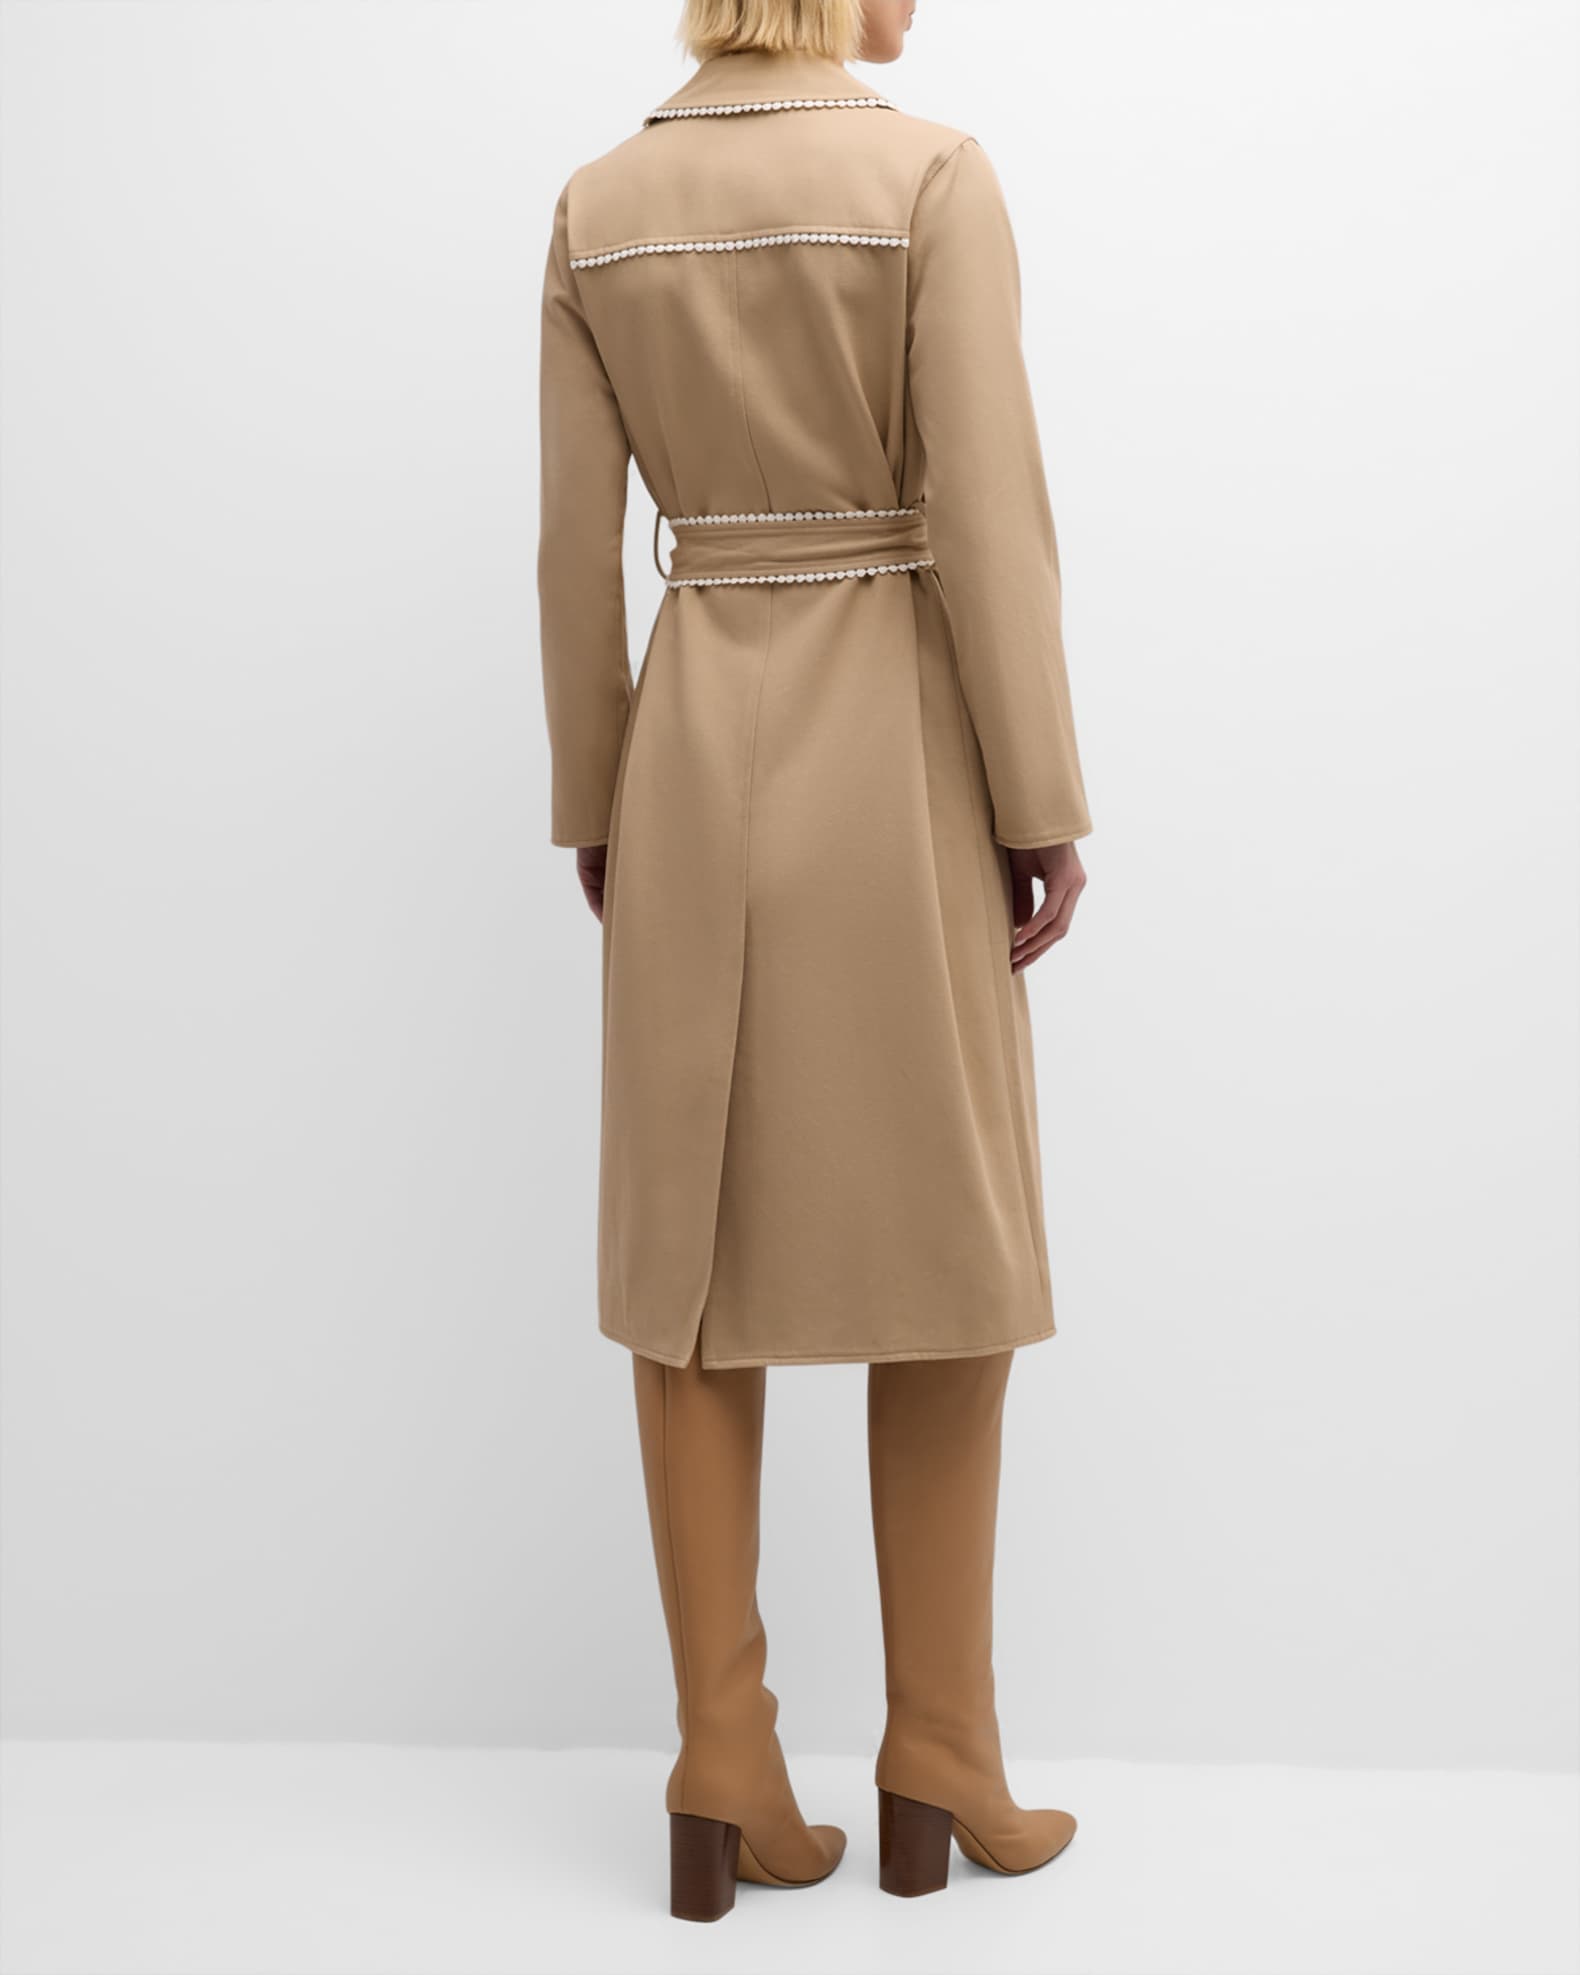 L'Agence Venus Trench Coat with Contrast Trim | Neiman Marcus